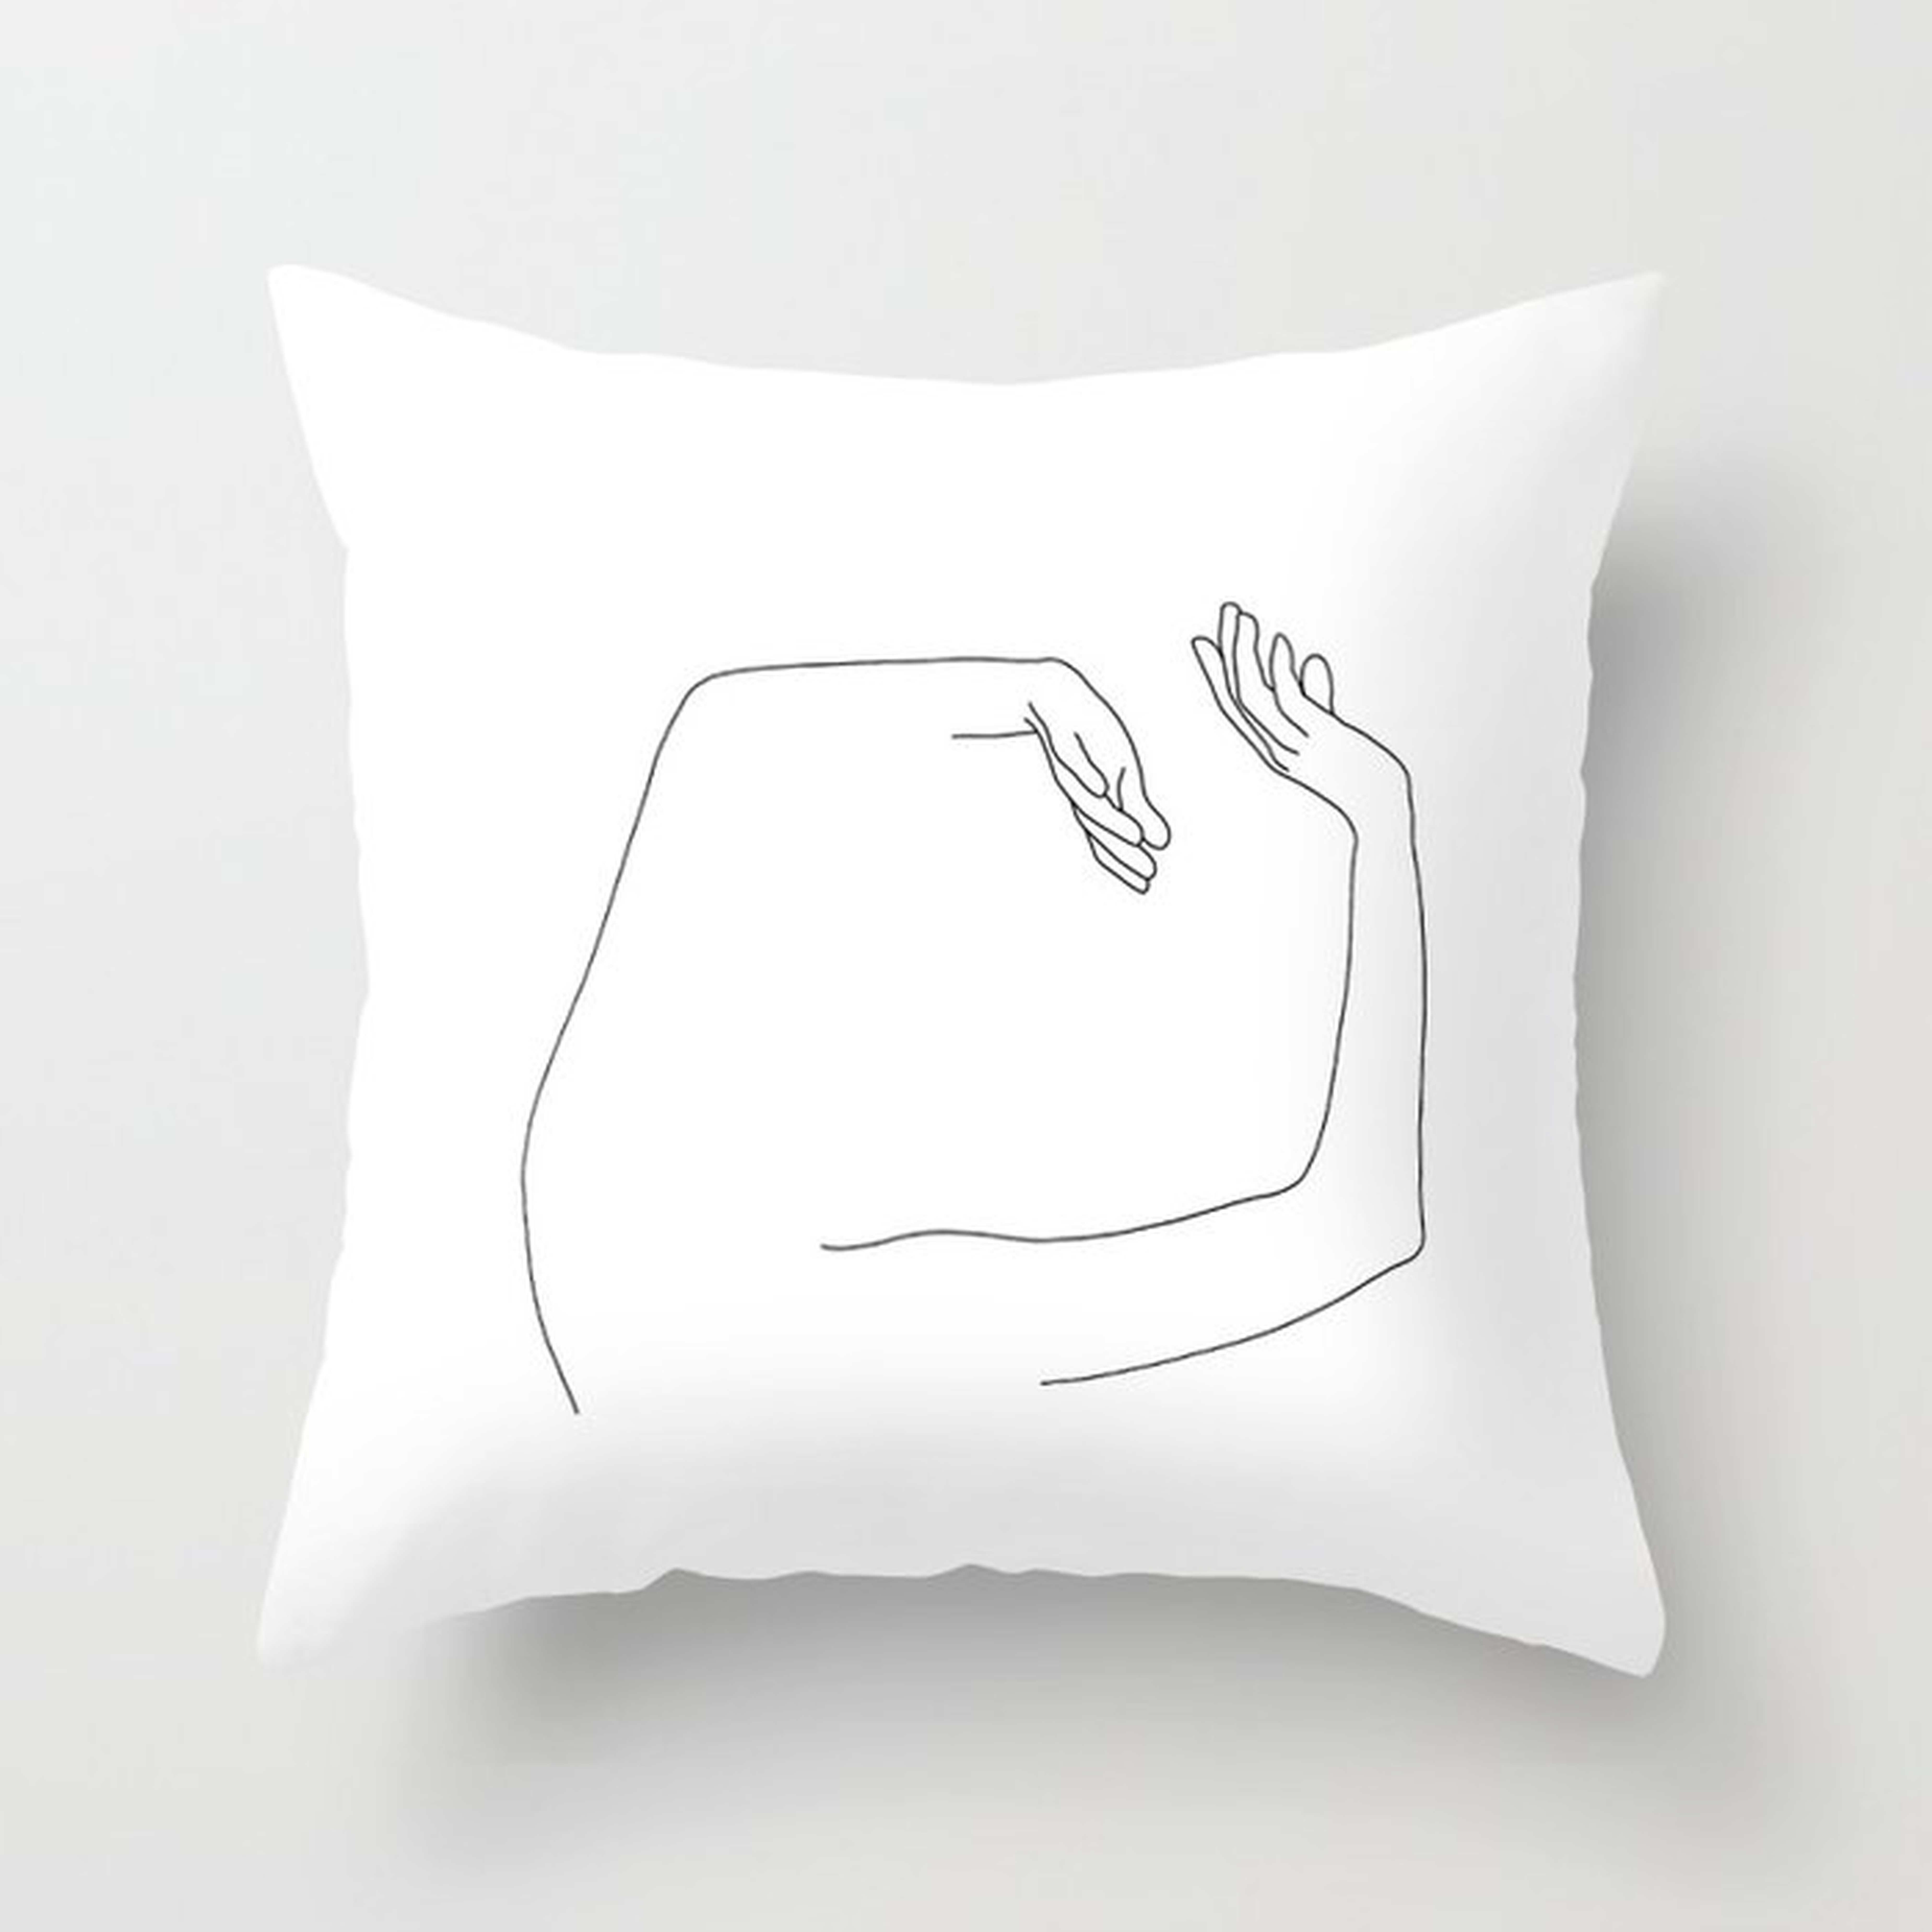 Arms Up Line Drawing - Maude Couch Throw Pillow by The Colour Study - Cover (24" x 24") with pillow insert - Indoor Pillow - Society6